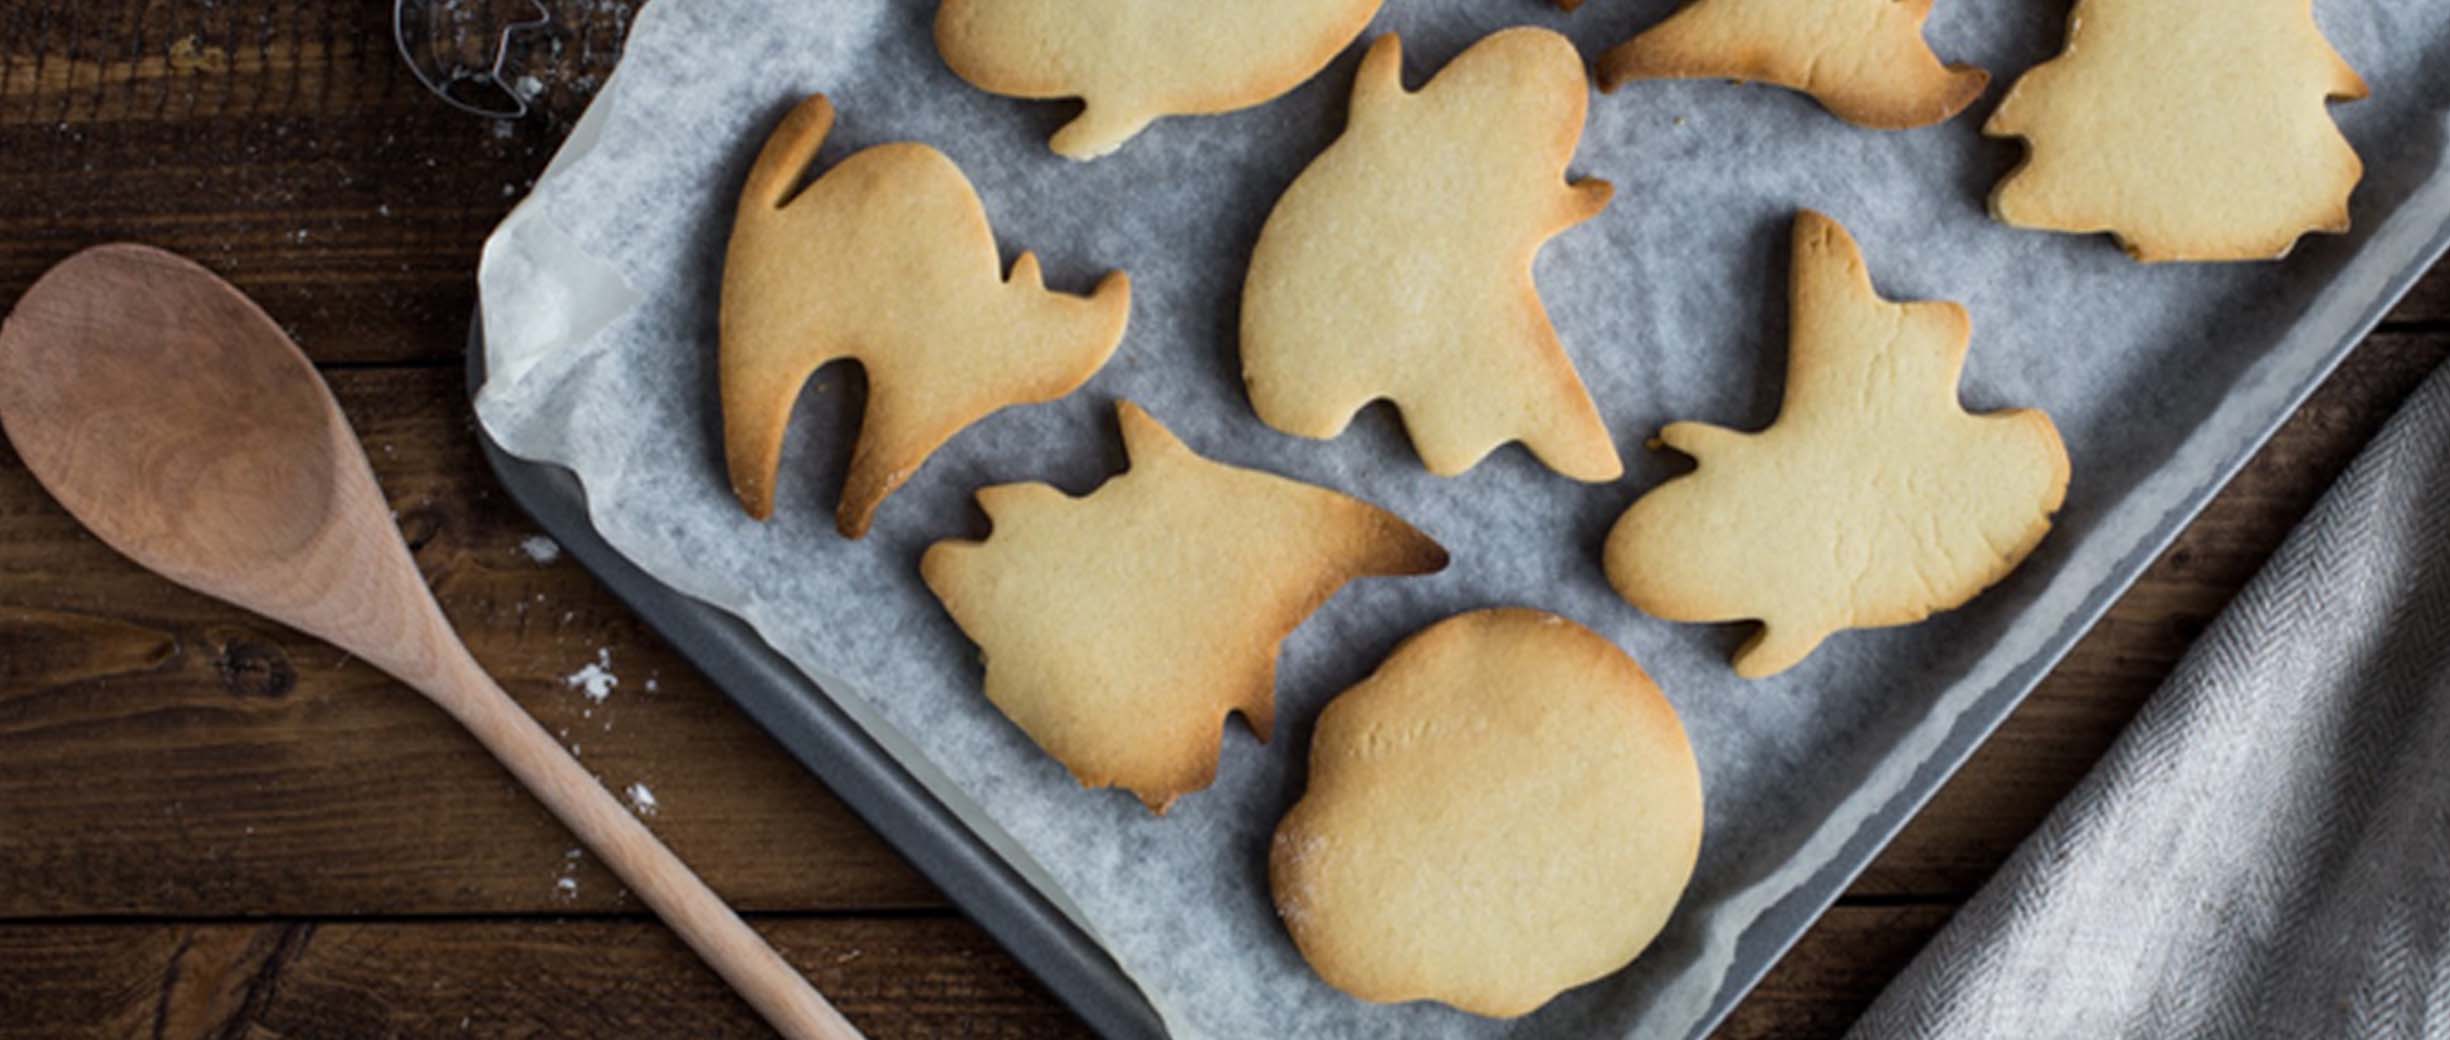 5 More Quick, Easy and Really Creepy Halloween Treat Ideas